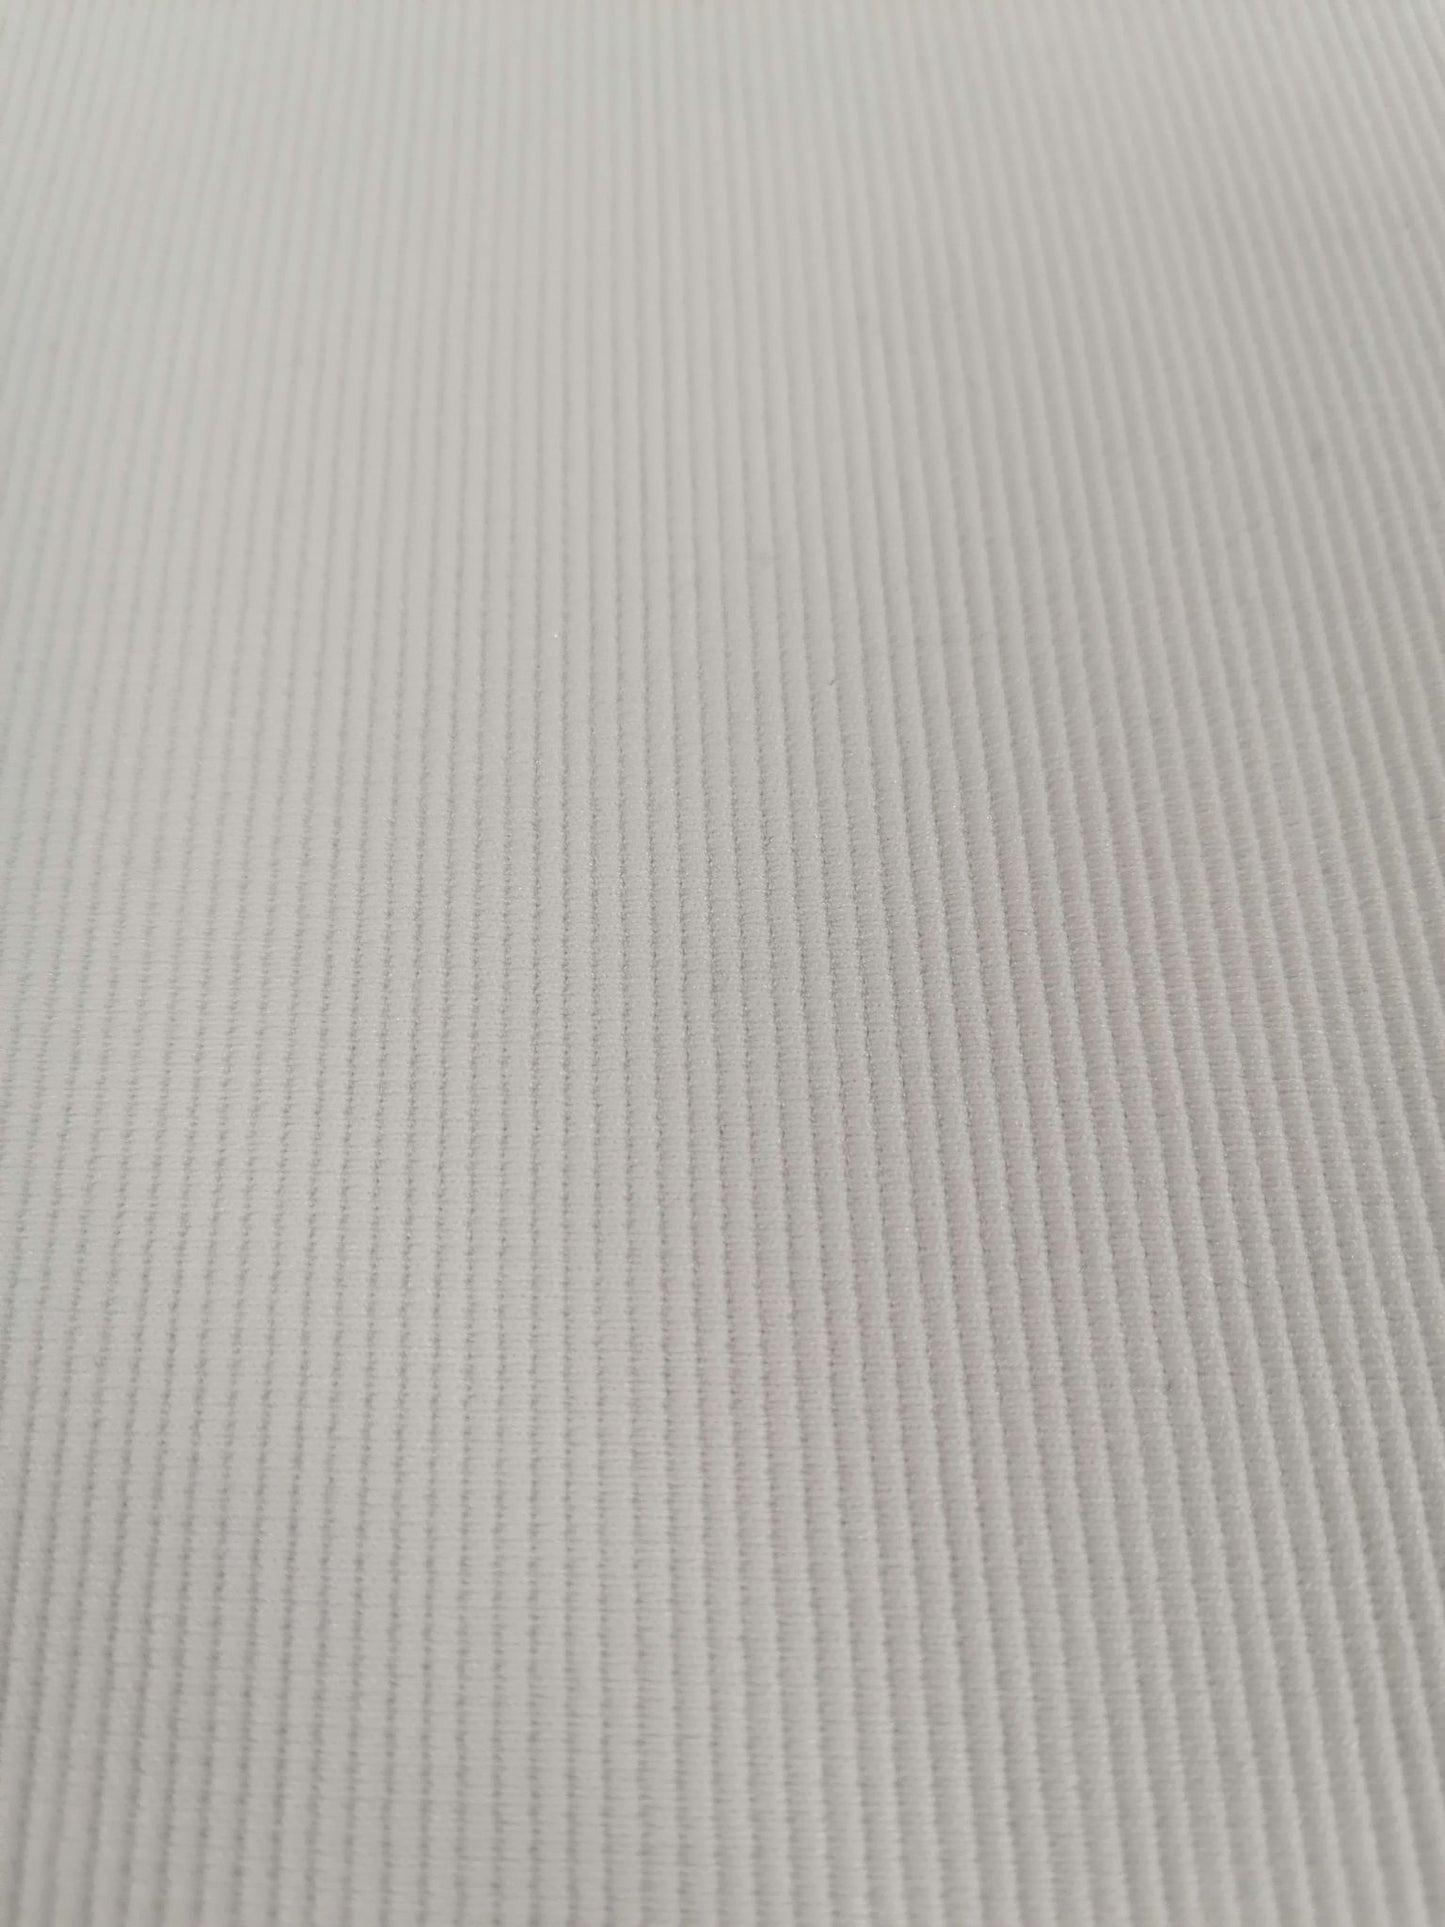 Scuba Corduroy - White - 56" Wide - Sold By the Metre